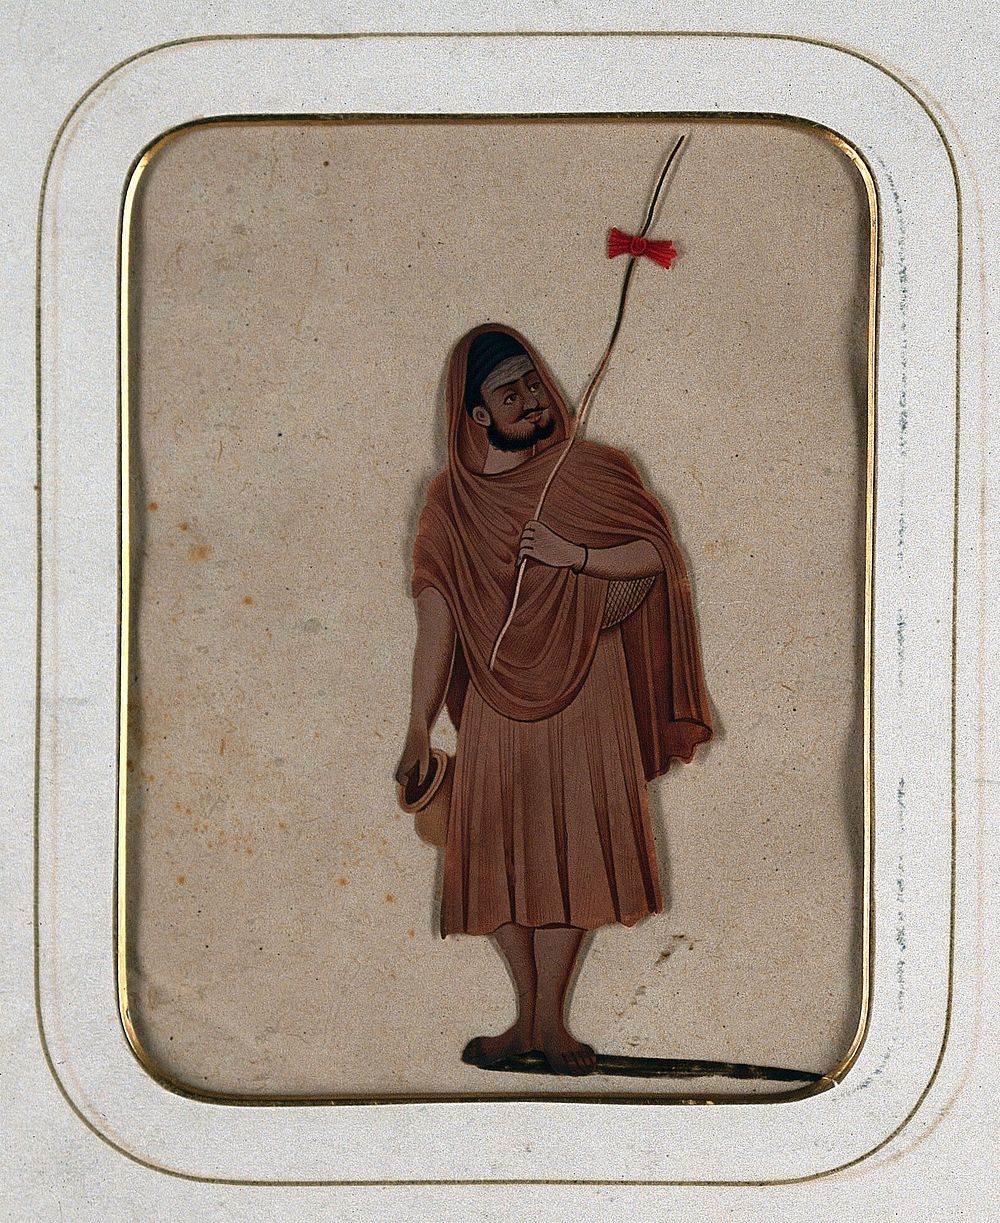 A holy man holding a stick and a water pot. Gouache painting on mica by an Indian artist.